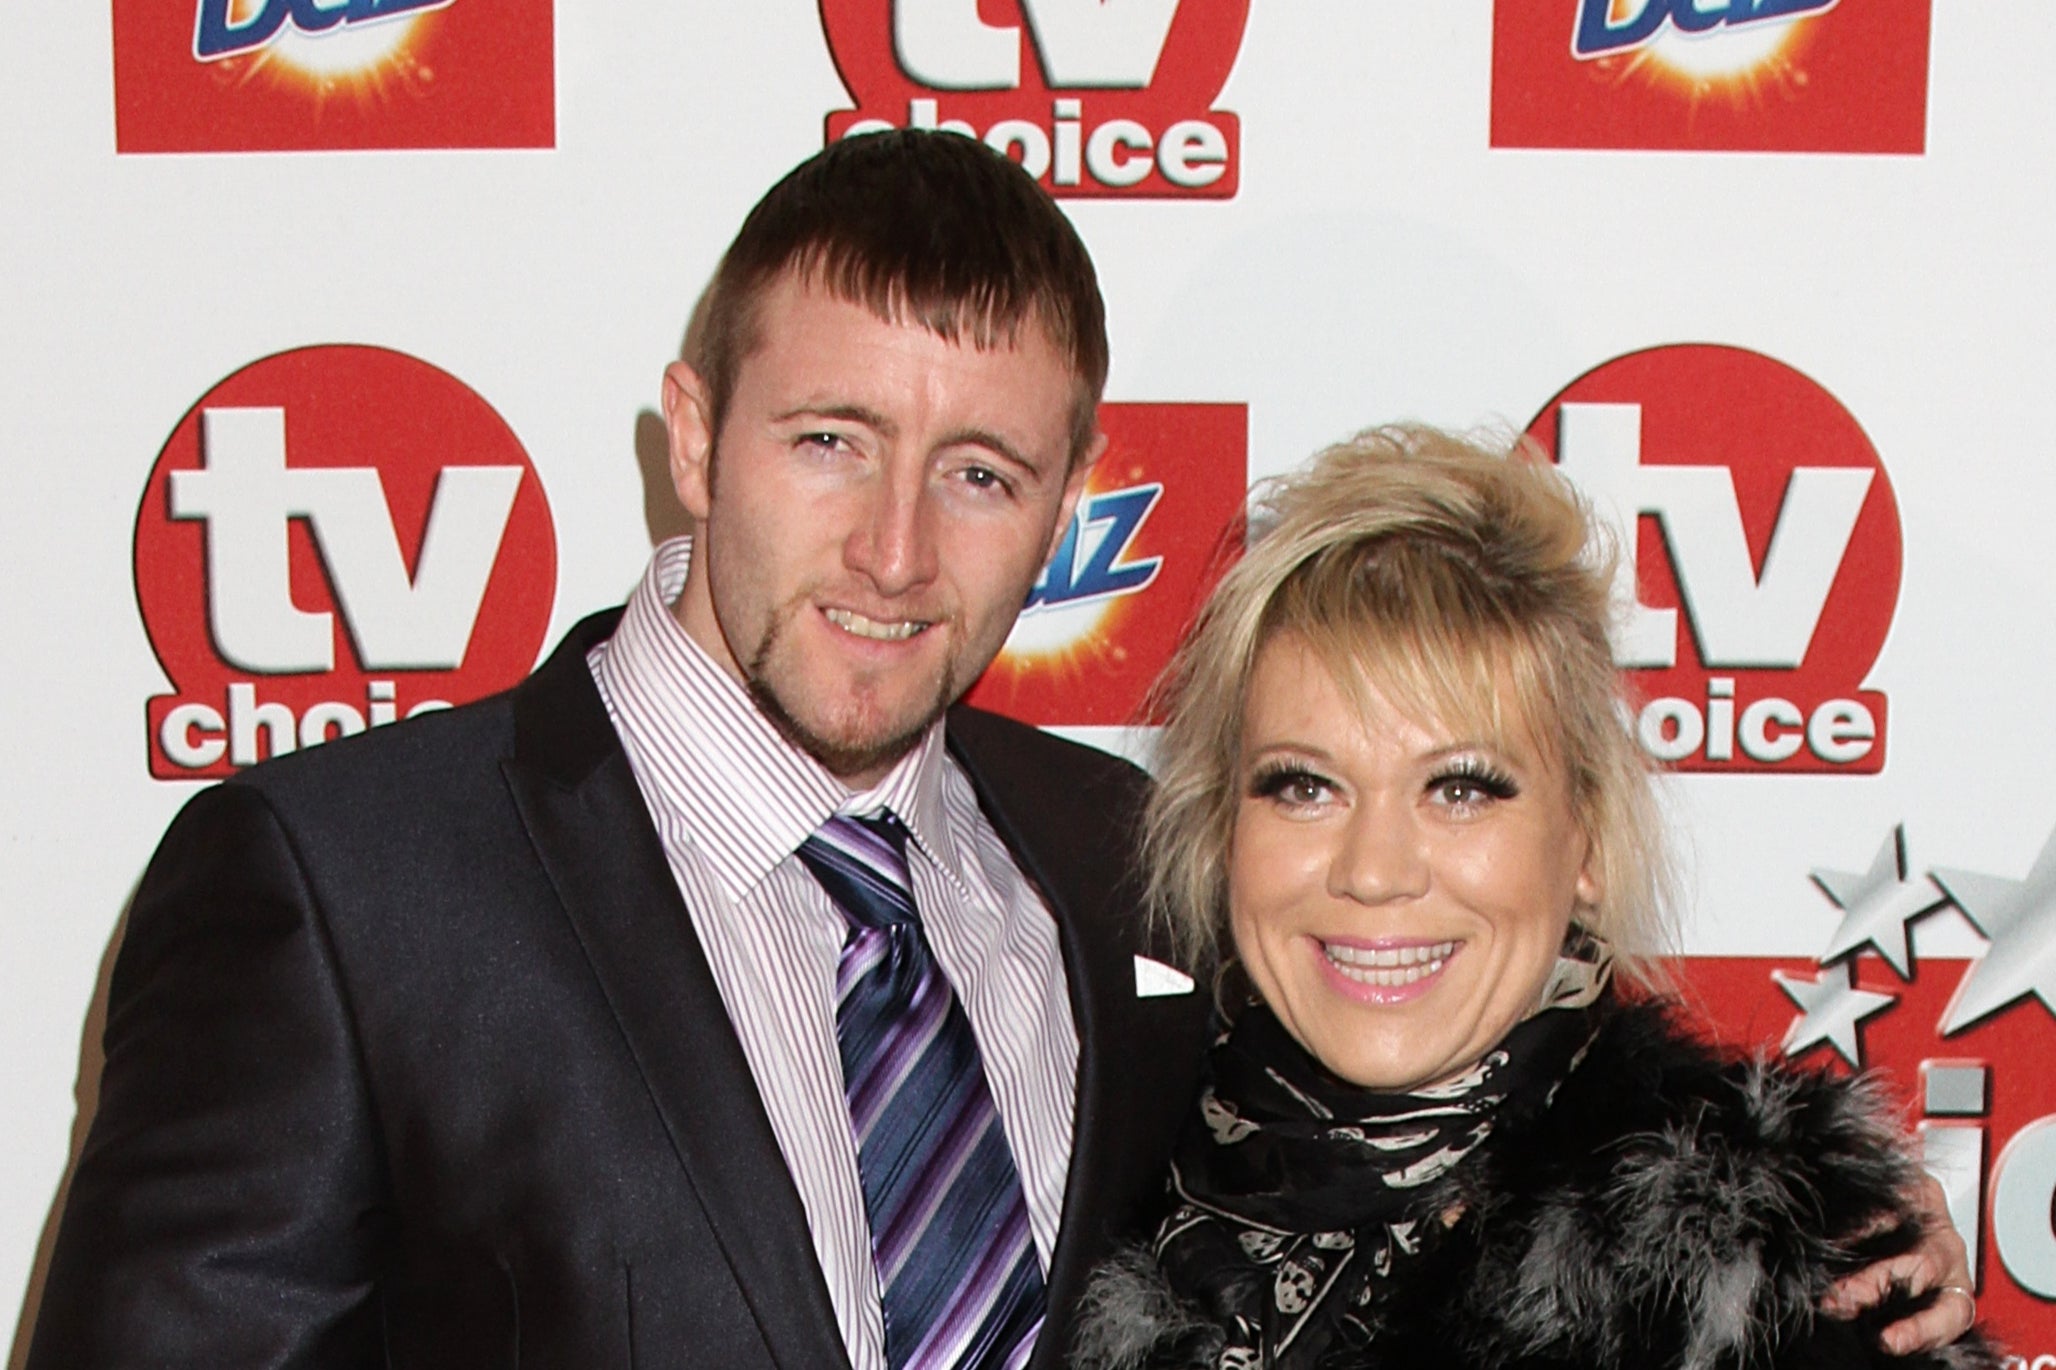 Tina Malone and Paul Chase in 2011